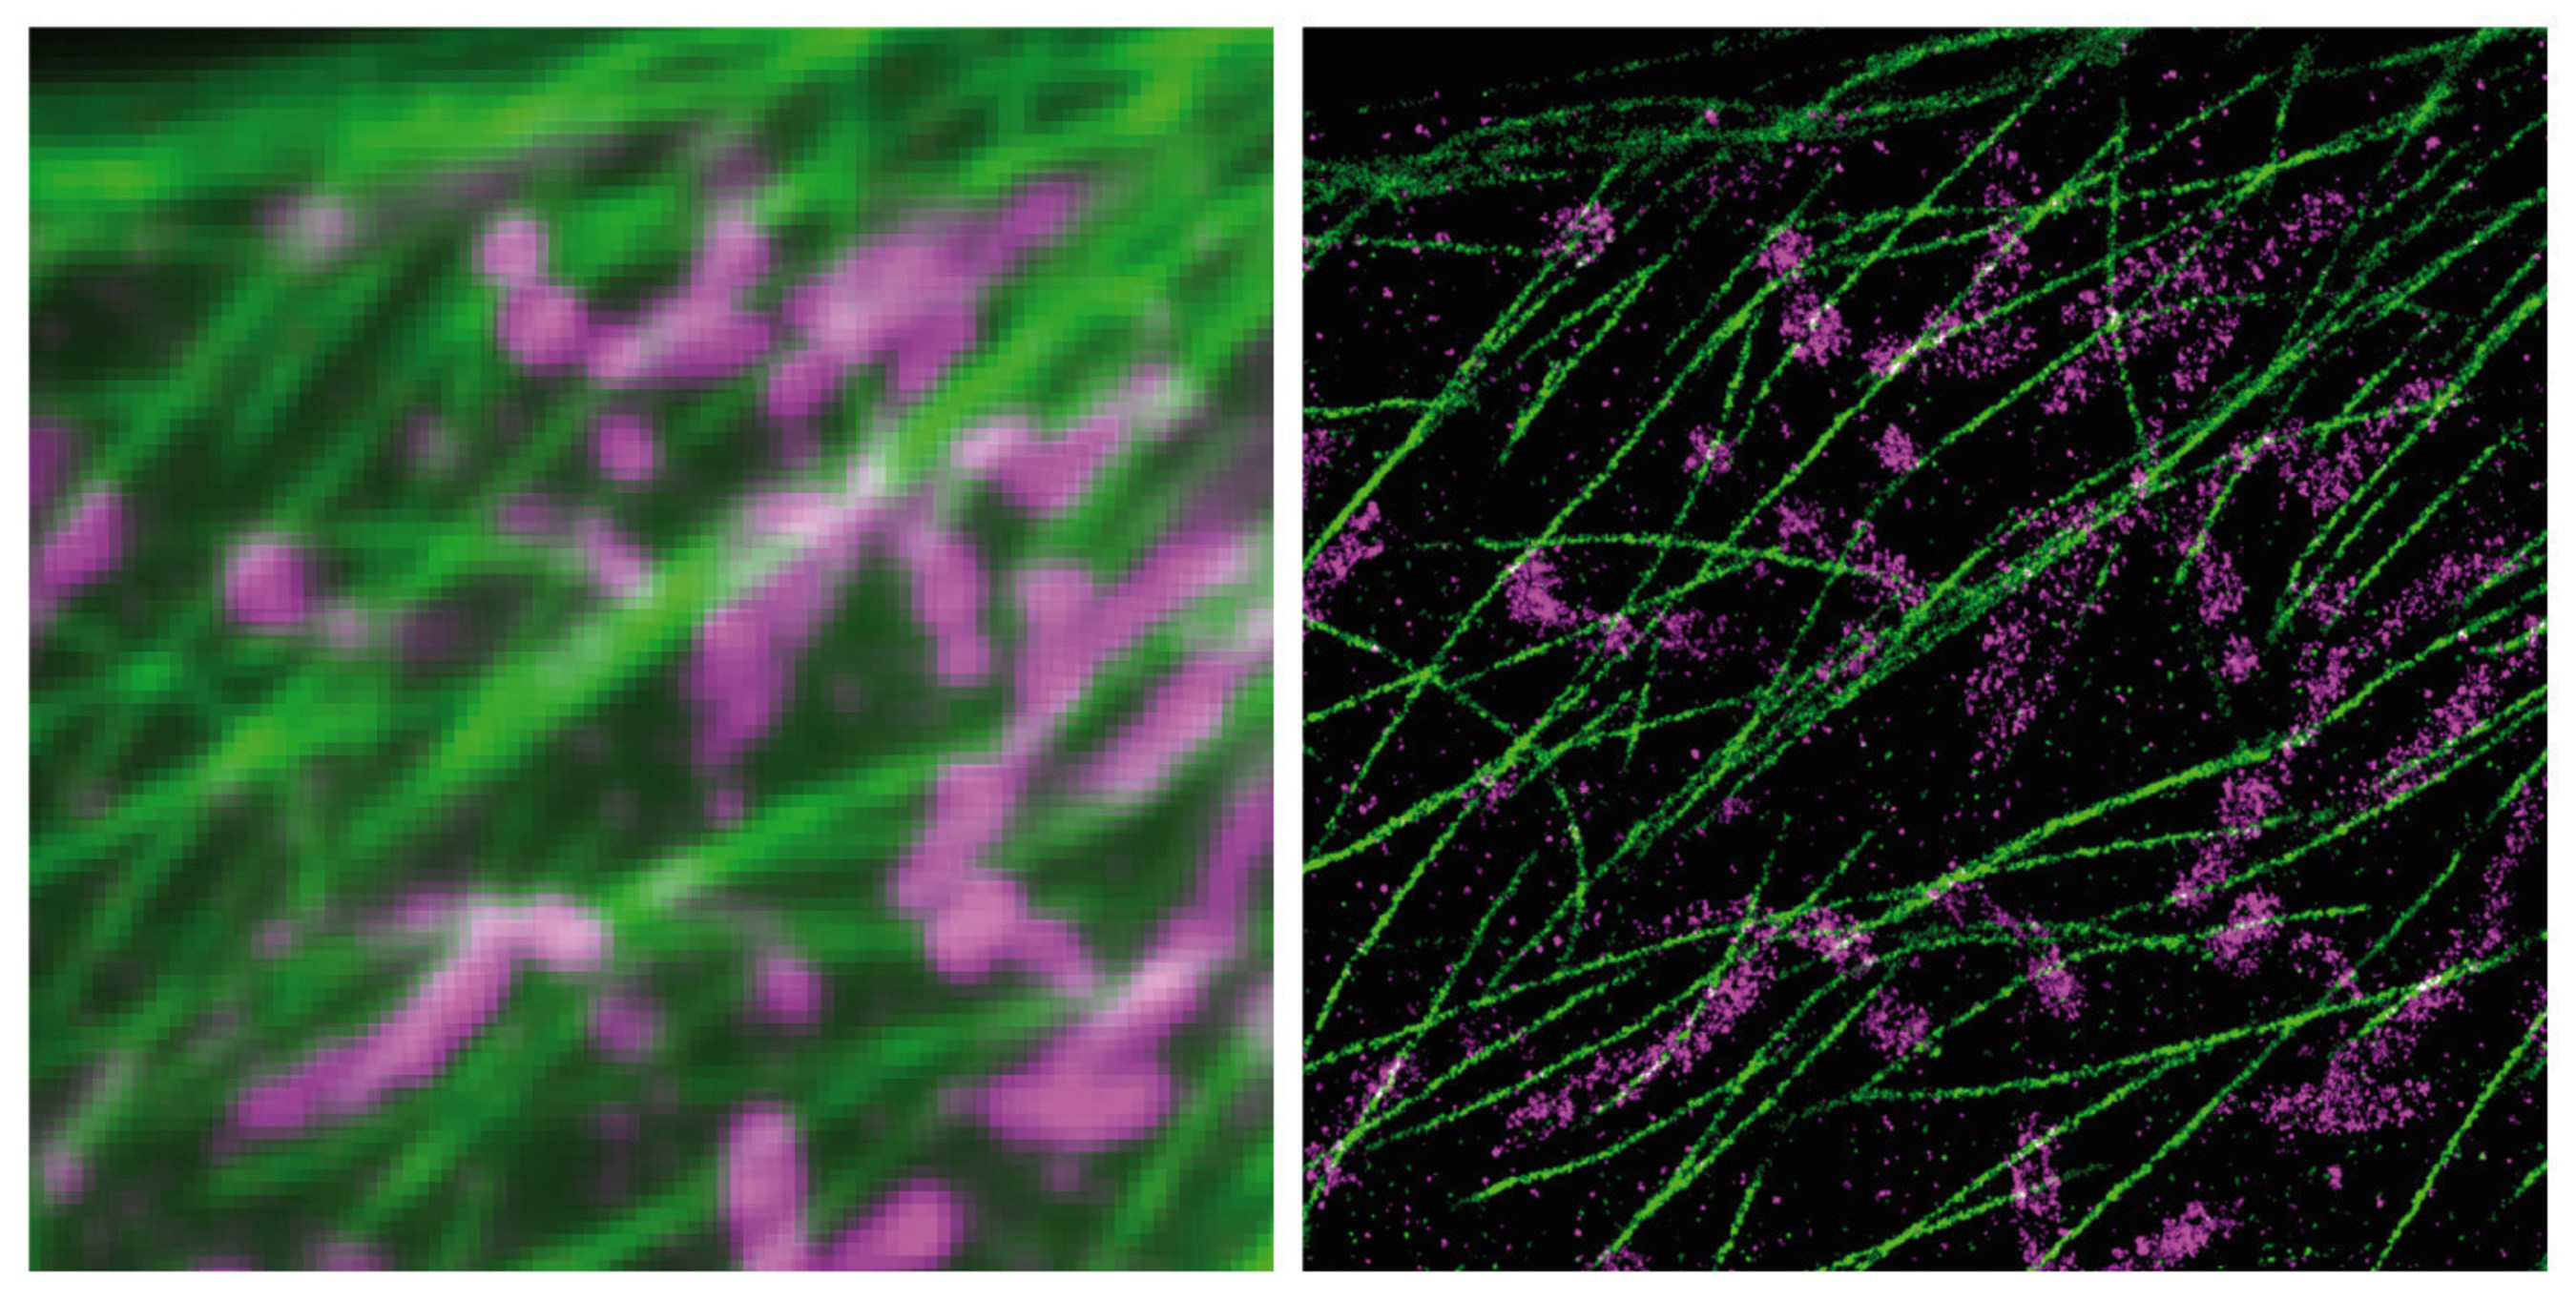 DNA-PAINT and Exchange-PAINT technologes (right image) dramatically improve the limited resolution abilities of single-molecule microscopes (left image).  Shown are structures of thin microtubule fibers (green) that build a skeleton within cells and mitochondria (magenta) as the cell's biochemical powerhouses both turned from blurry into super-sharp molecular images. Credit: Wyss Institute at Harvard University.